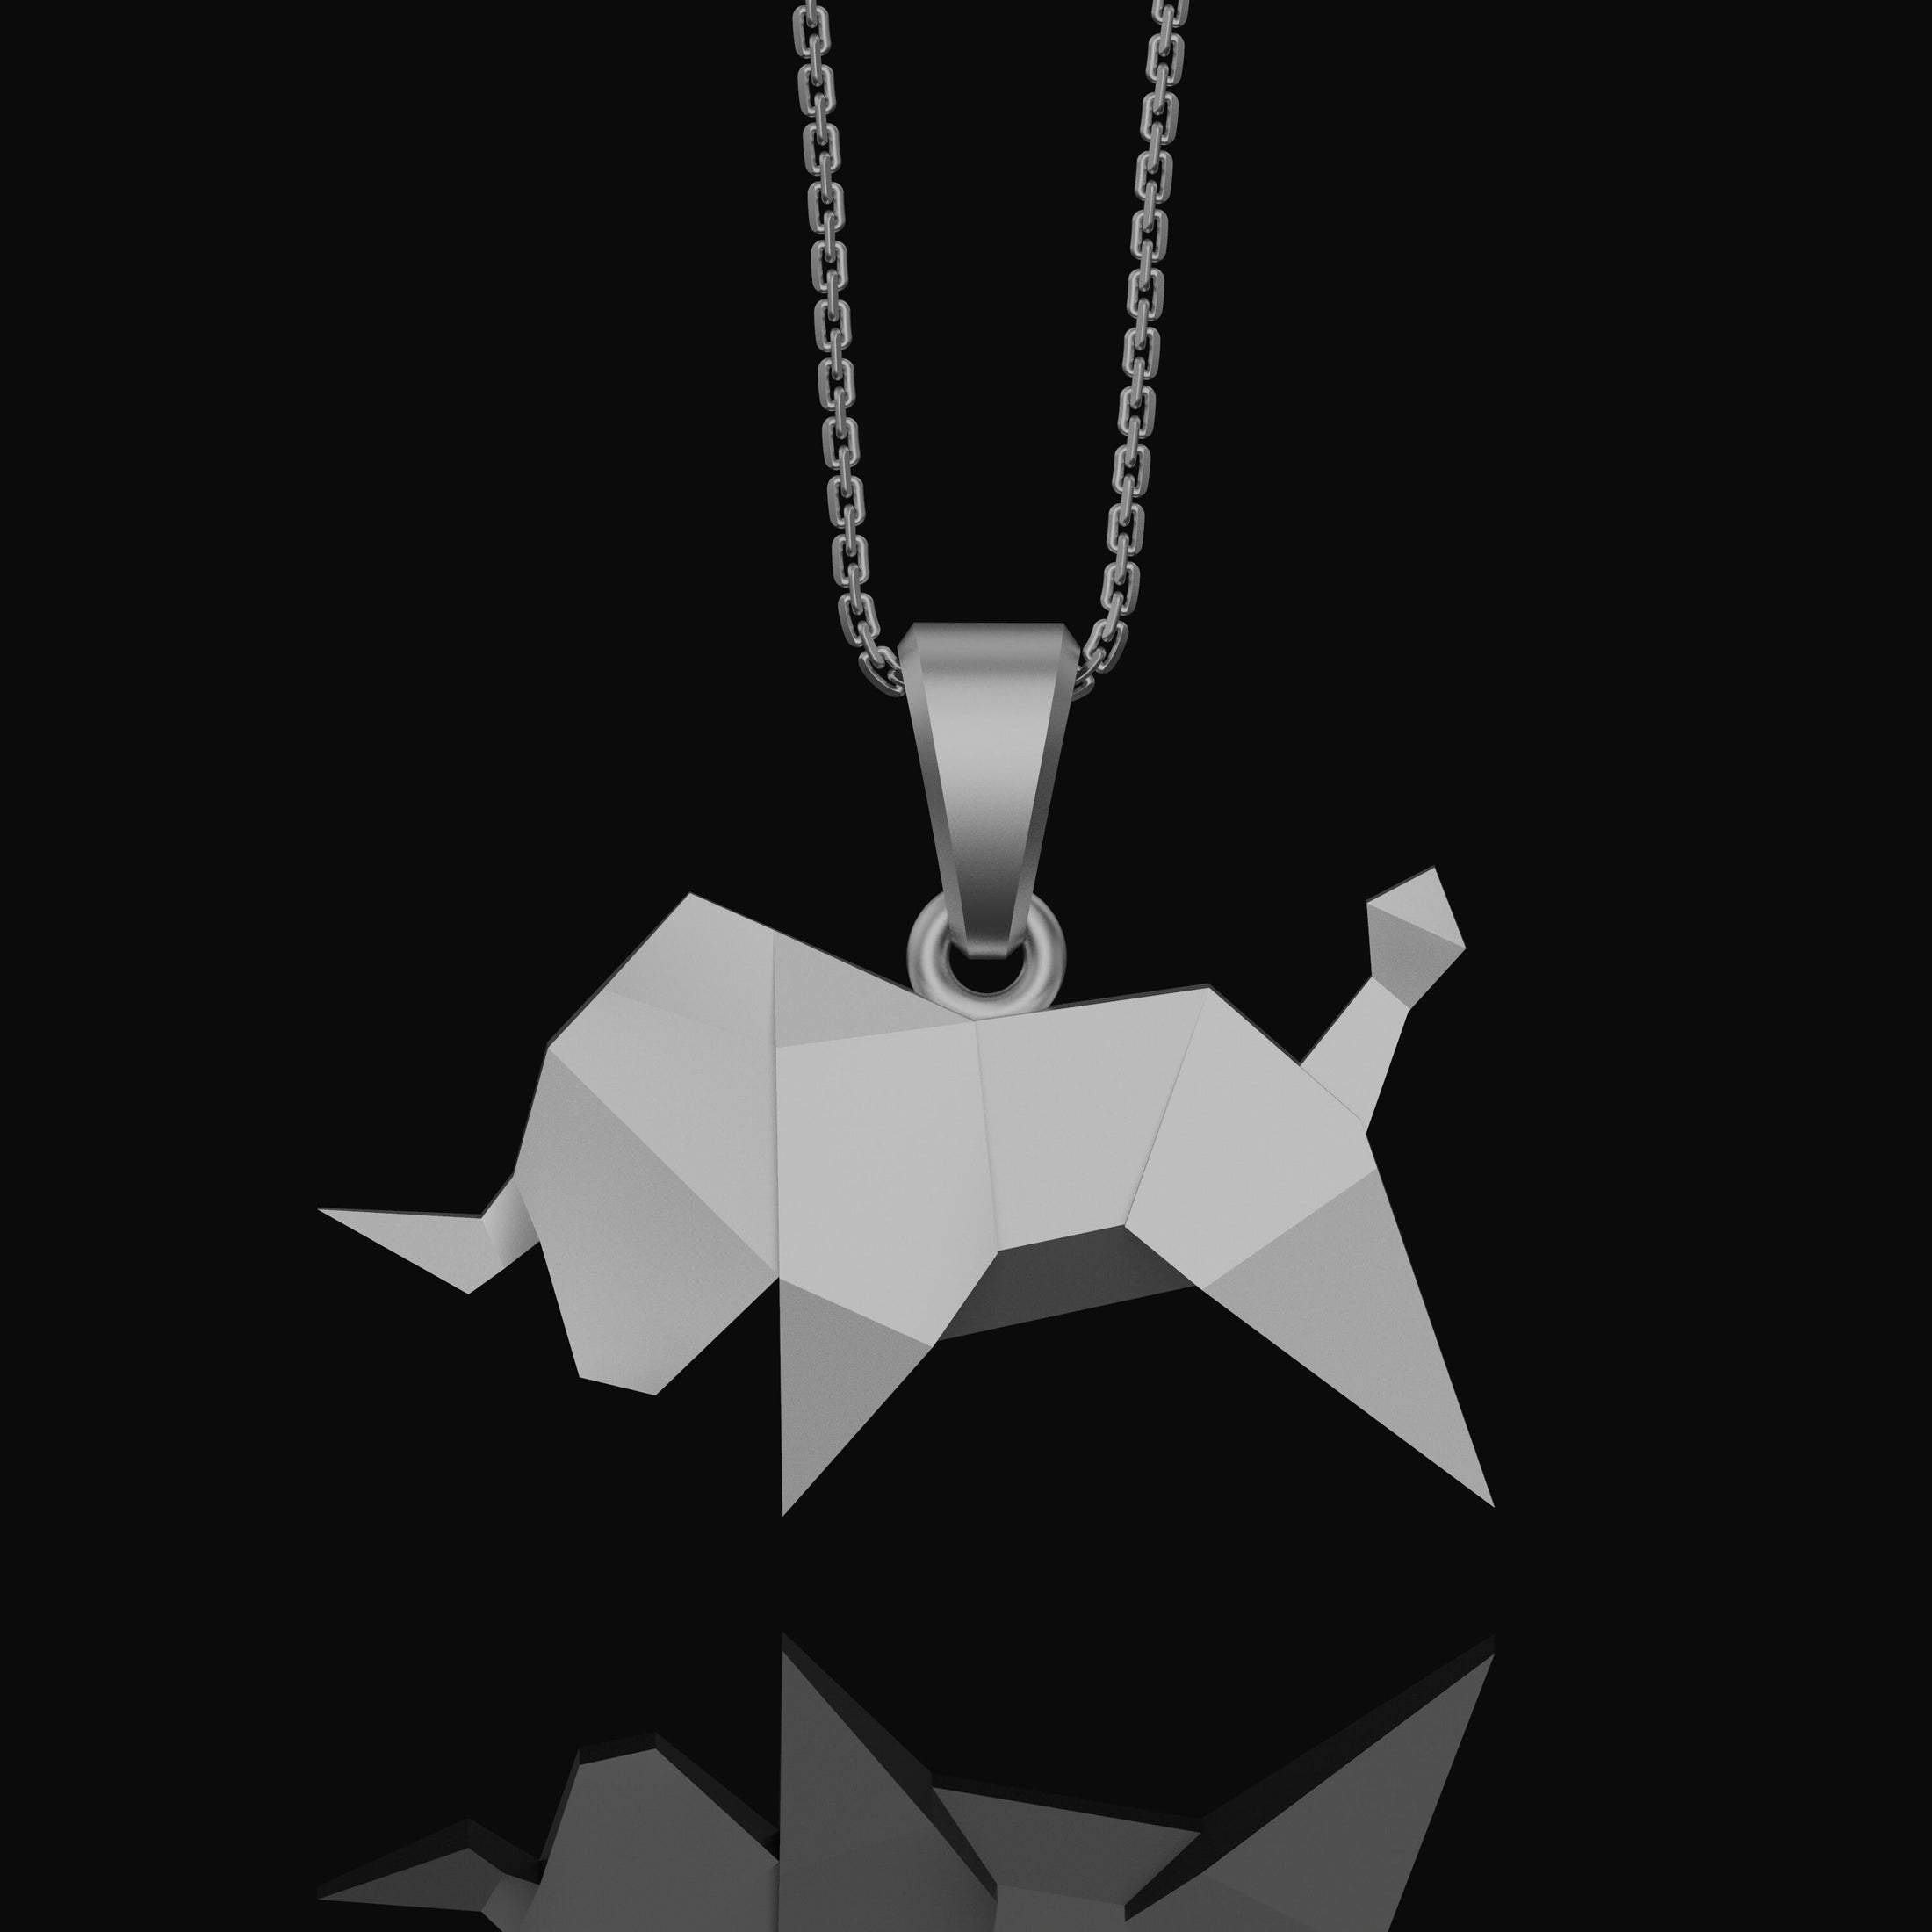 Origami Bull Pendant - Silver Cowboy Necklace, Elegant Folded Bullfighter Charm, Modern Western Rodeo Style Jewelry